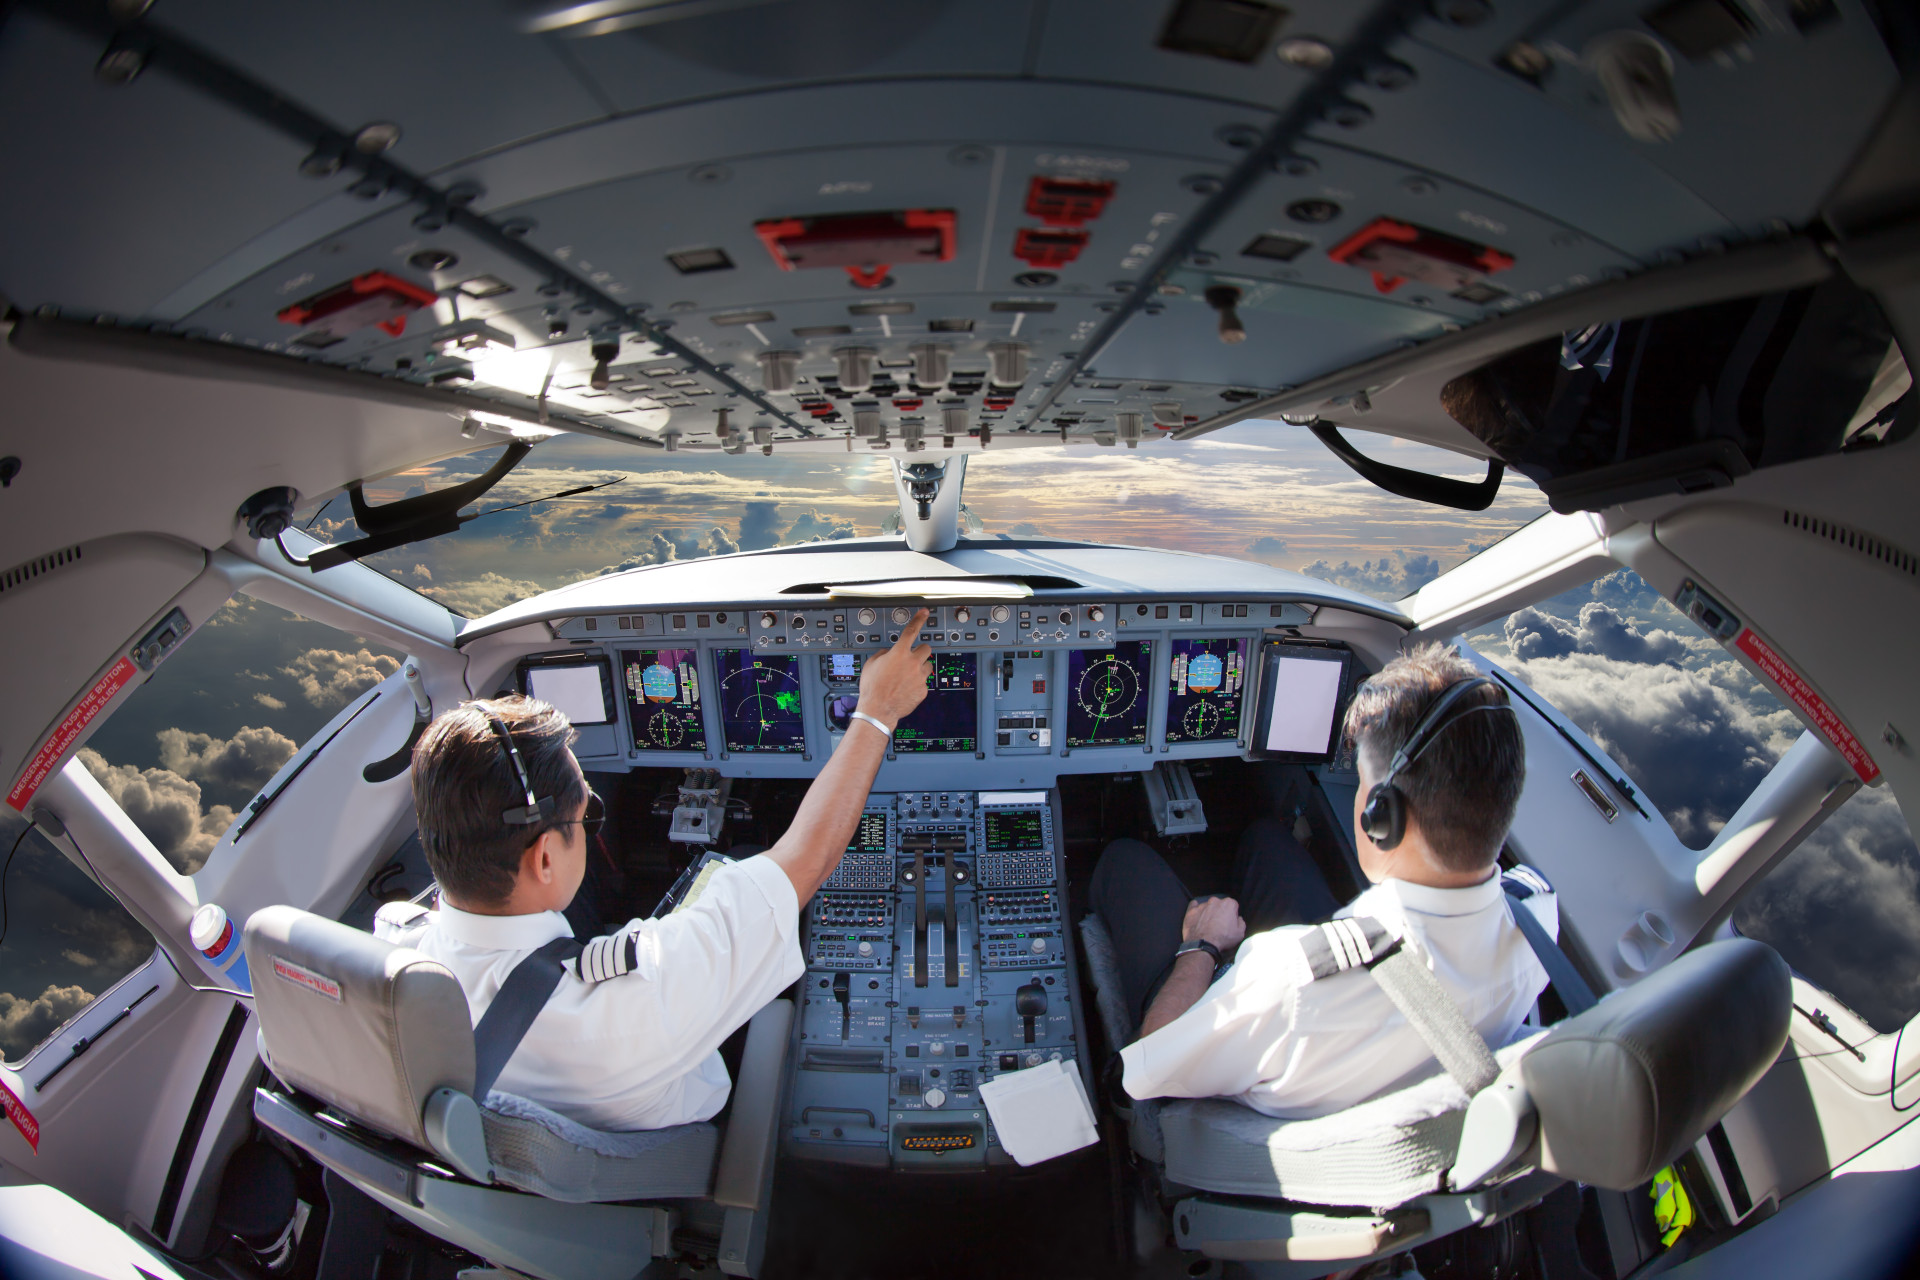 Apart from the discounted fares and travel perks, airline pilots also earn well—anywhere between US$100,000 to US$180,000, according to Time Money (although wages depend on many factors).<p>You may also like:<a href="https://www.starsinsider.com/n/417526?utm_source=msn.com&utm_medium=display&utm_campaign=referral_description&utm_content=240533v6en-us"> How 2020 will be, based on your Chinese horoscope</a></p>